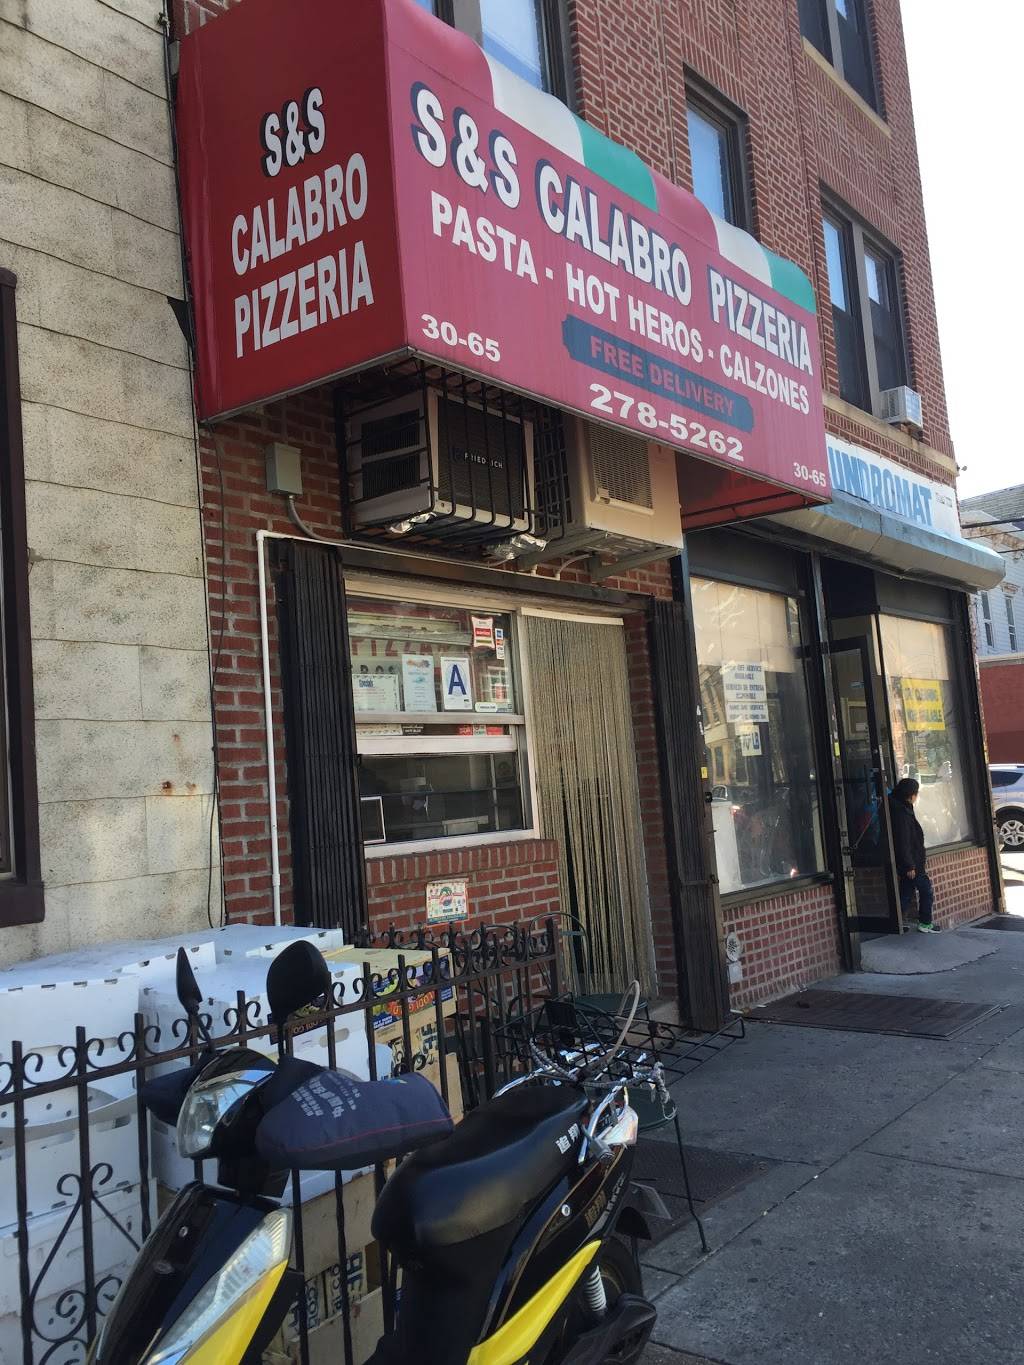 S & S Calabro Pizza | meal delivery | 30-65 14th St, Astoria, NY 11102, USA | 7182785262 OR +1 718-278-5262